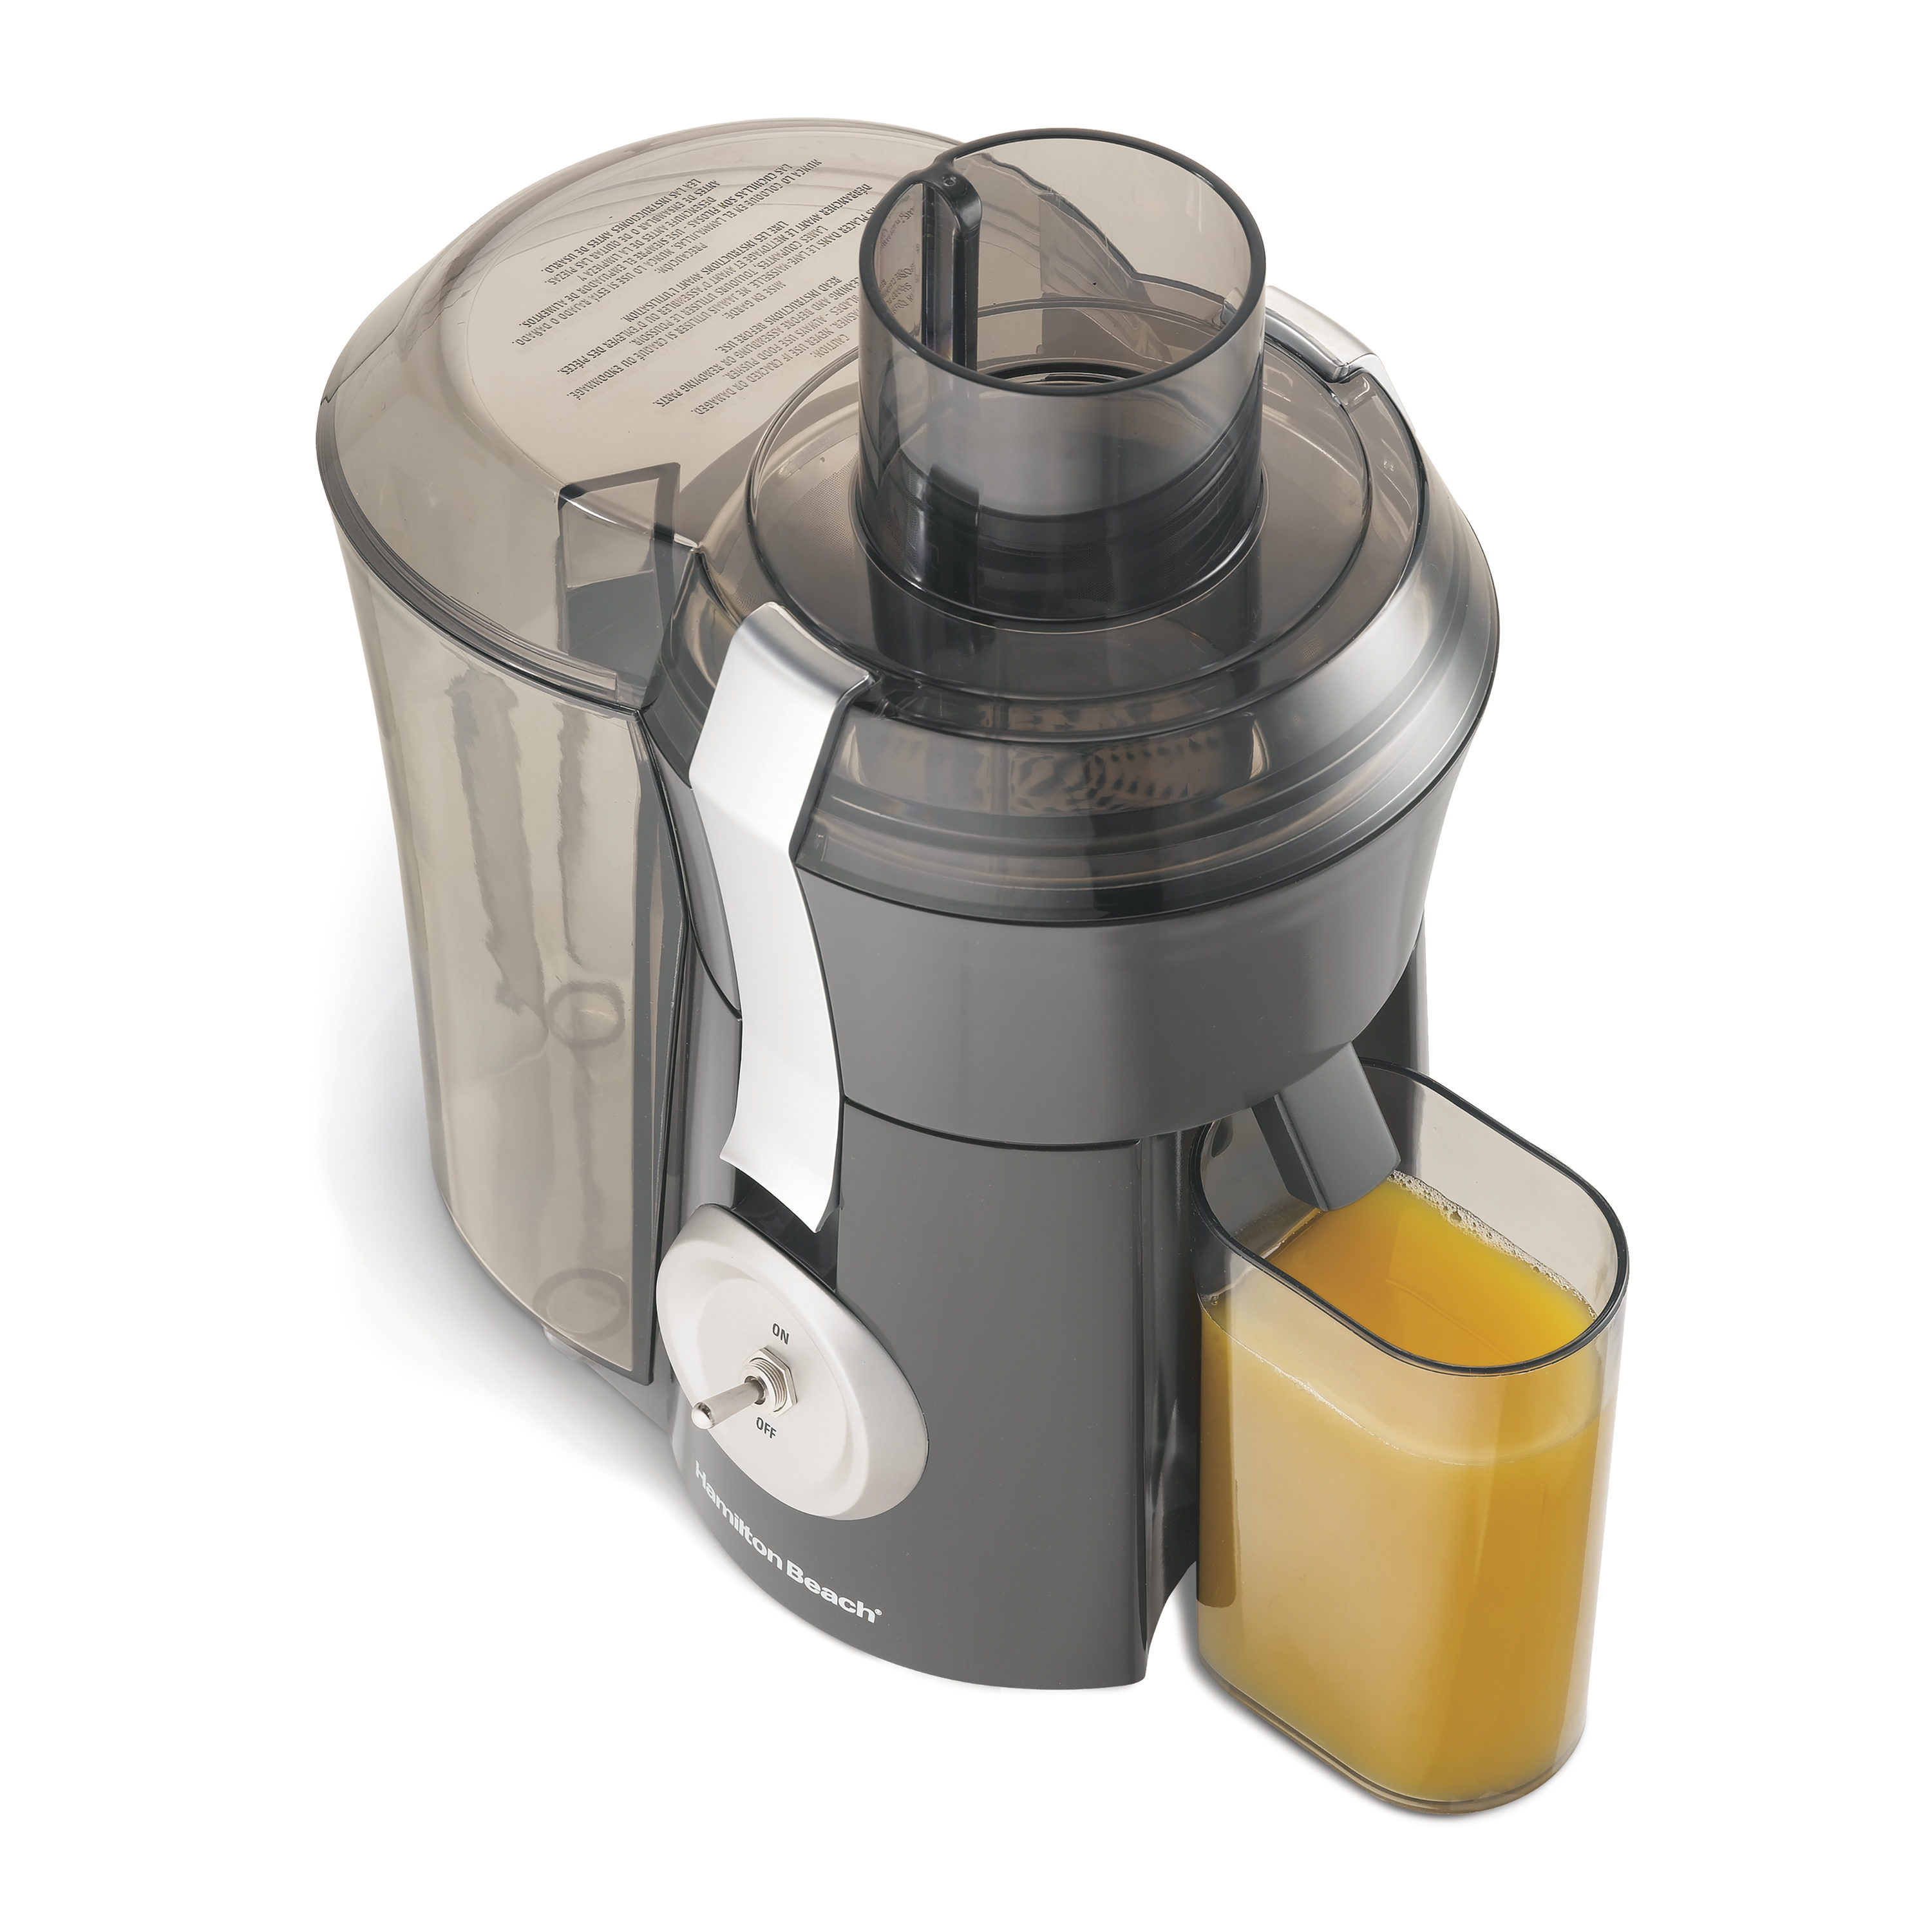 nutribullet Nutribullet Juicer Pro - Lockable Extractor with UL Safety  Listing - Silver - 1000-Watt Motor - Dishwasher-Safe - Includes Accessories  in the Juicers department at